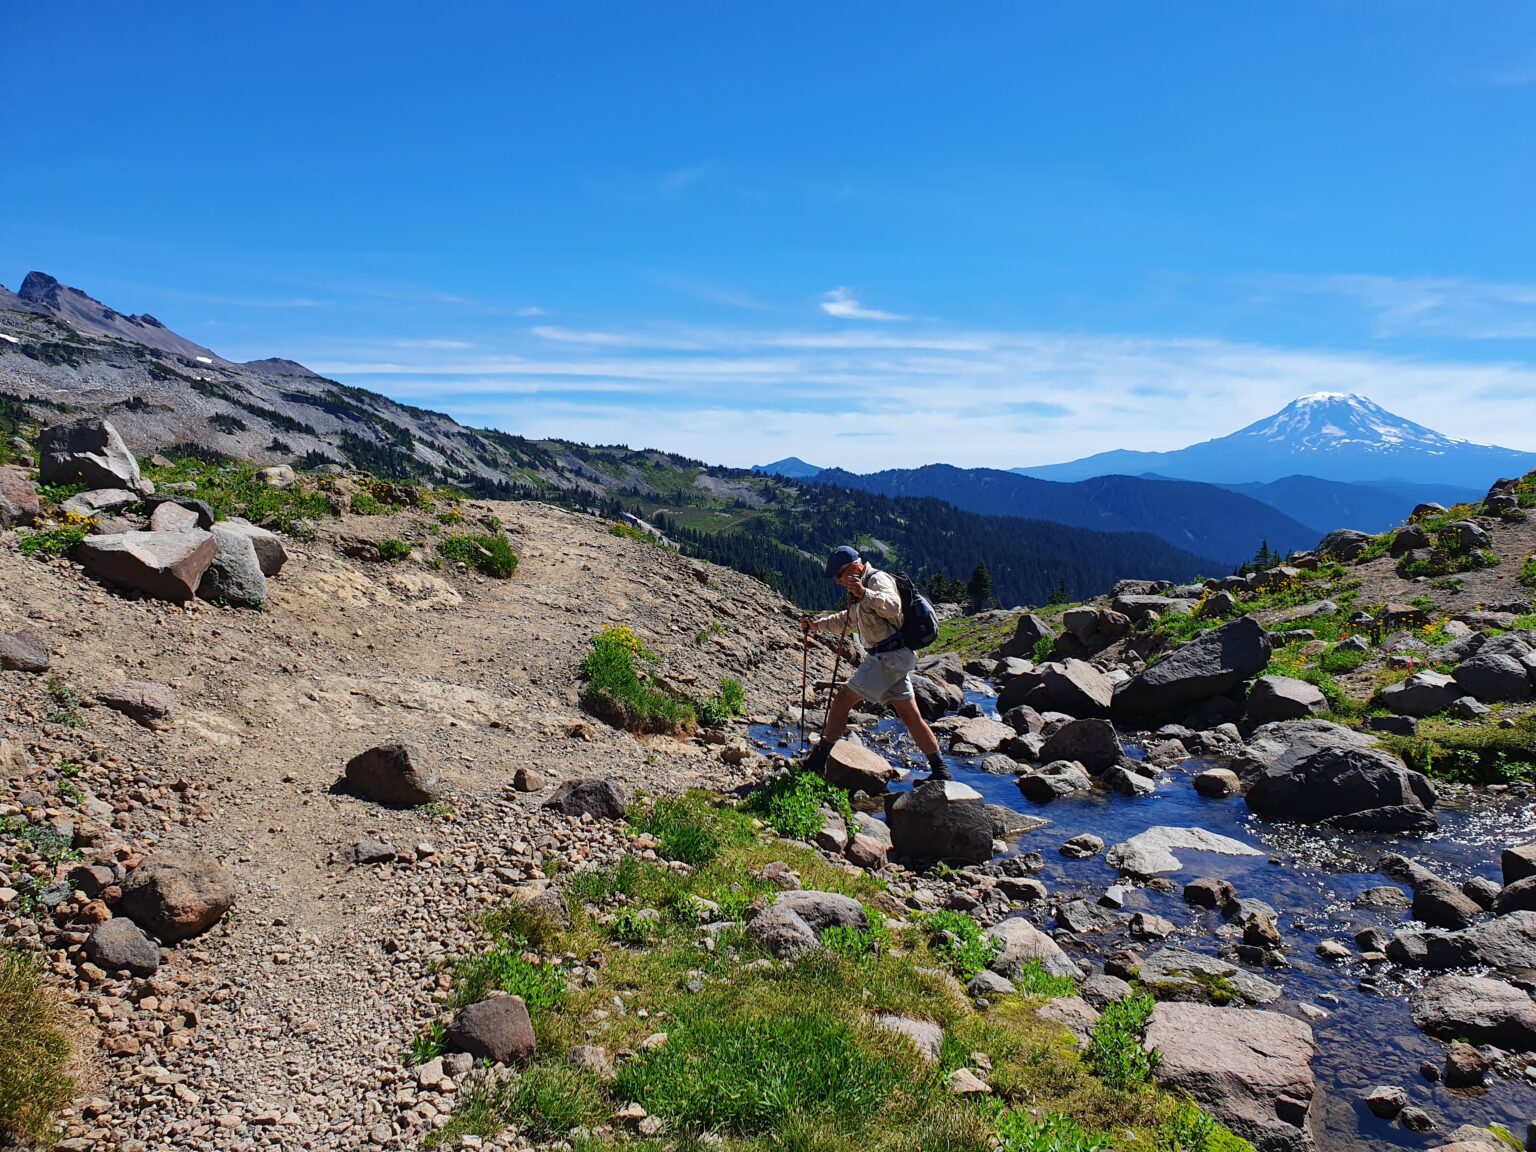 Passing a stream with Mount Adams in the background